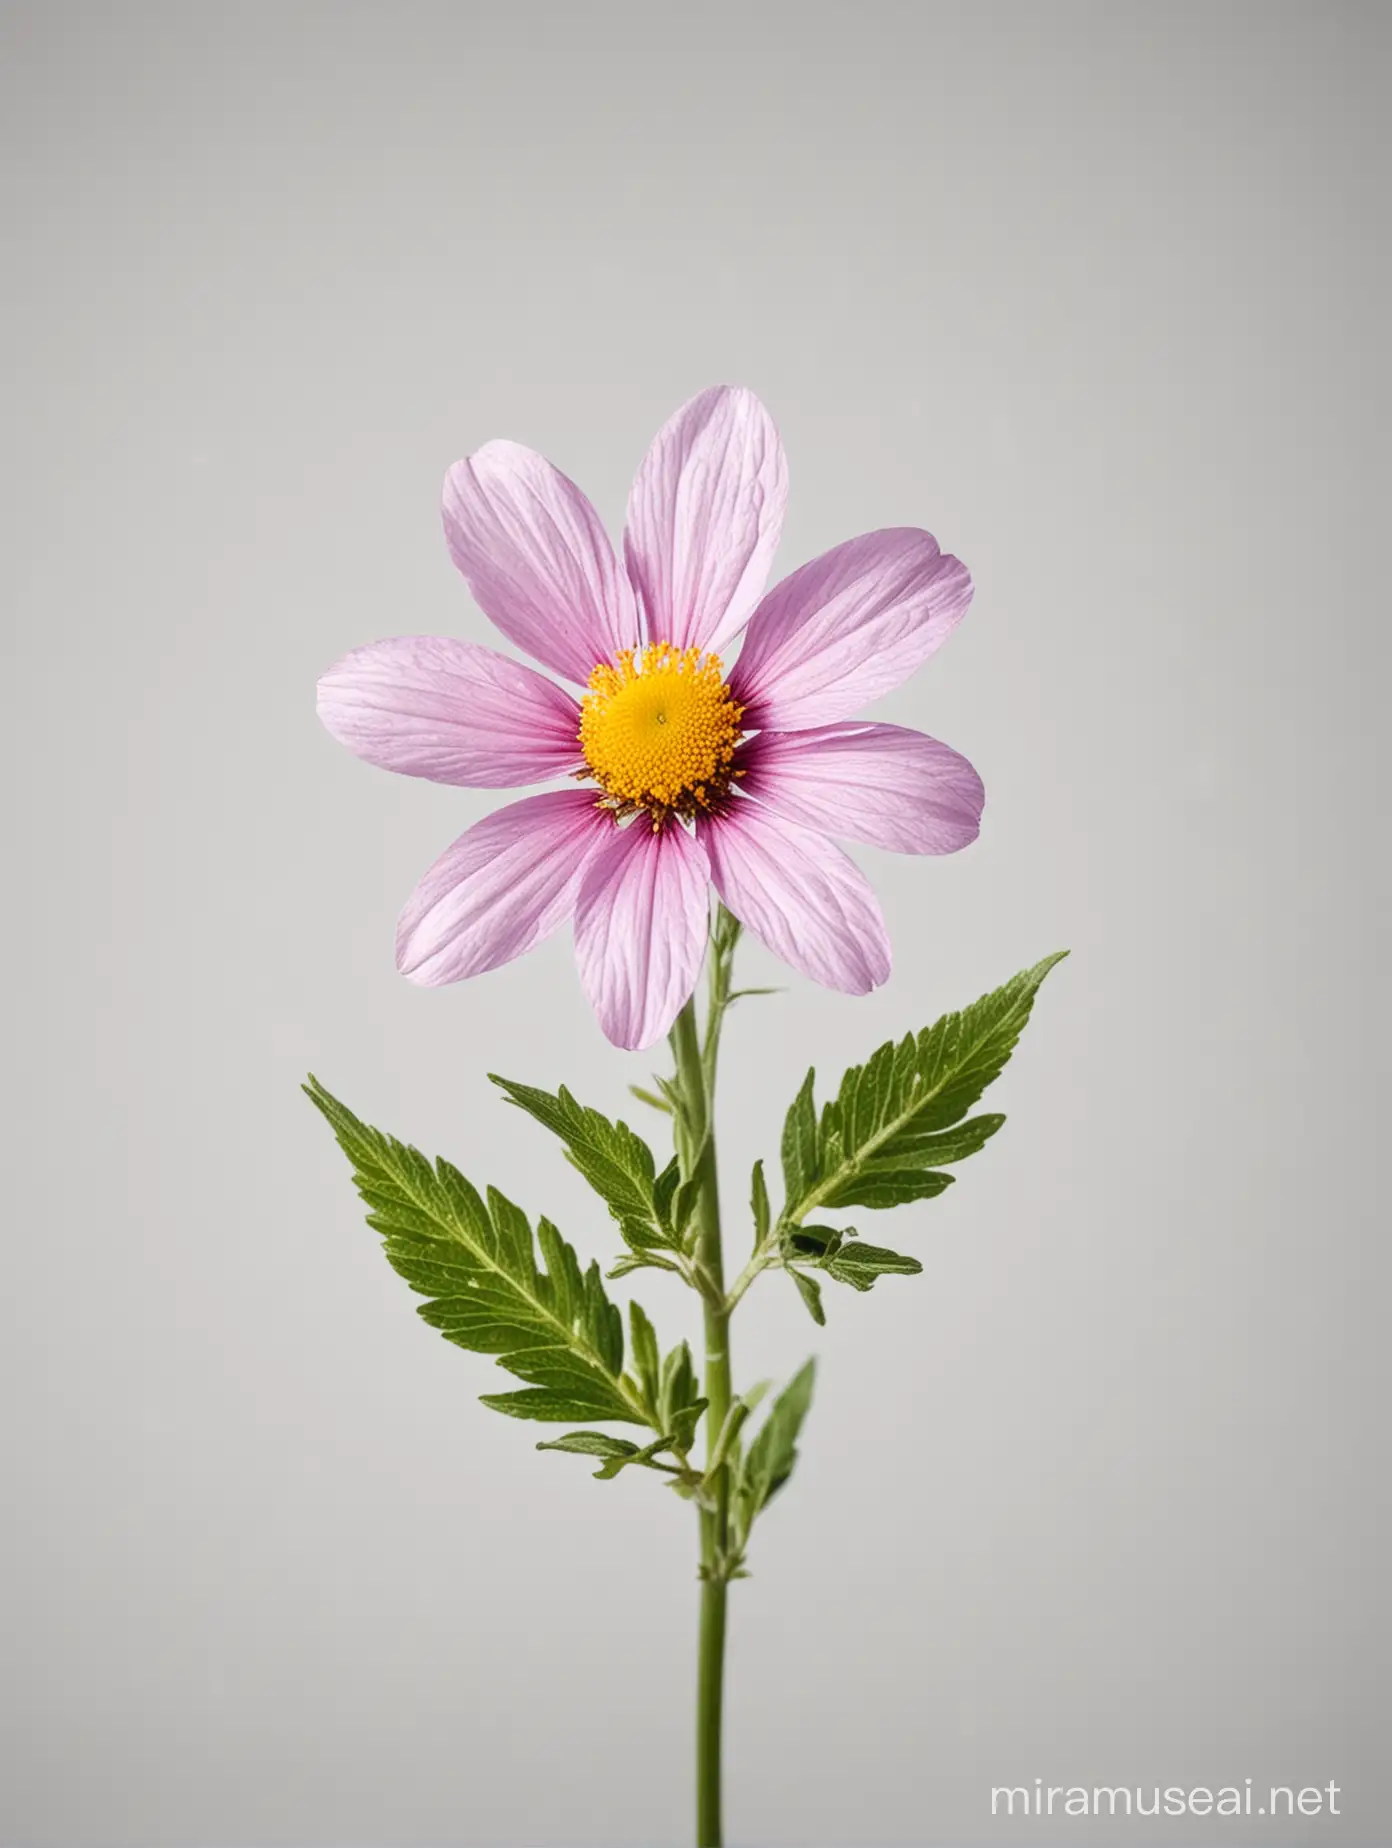 Colorful Wild Flowers Blooming Against White Background